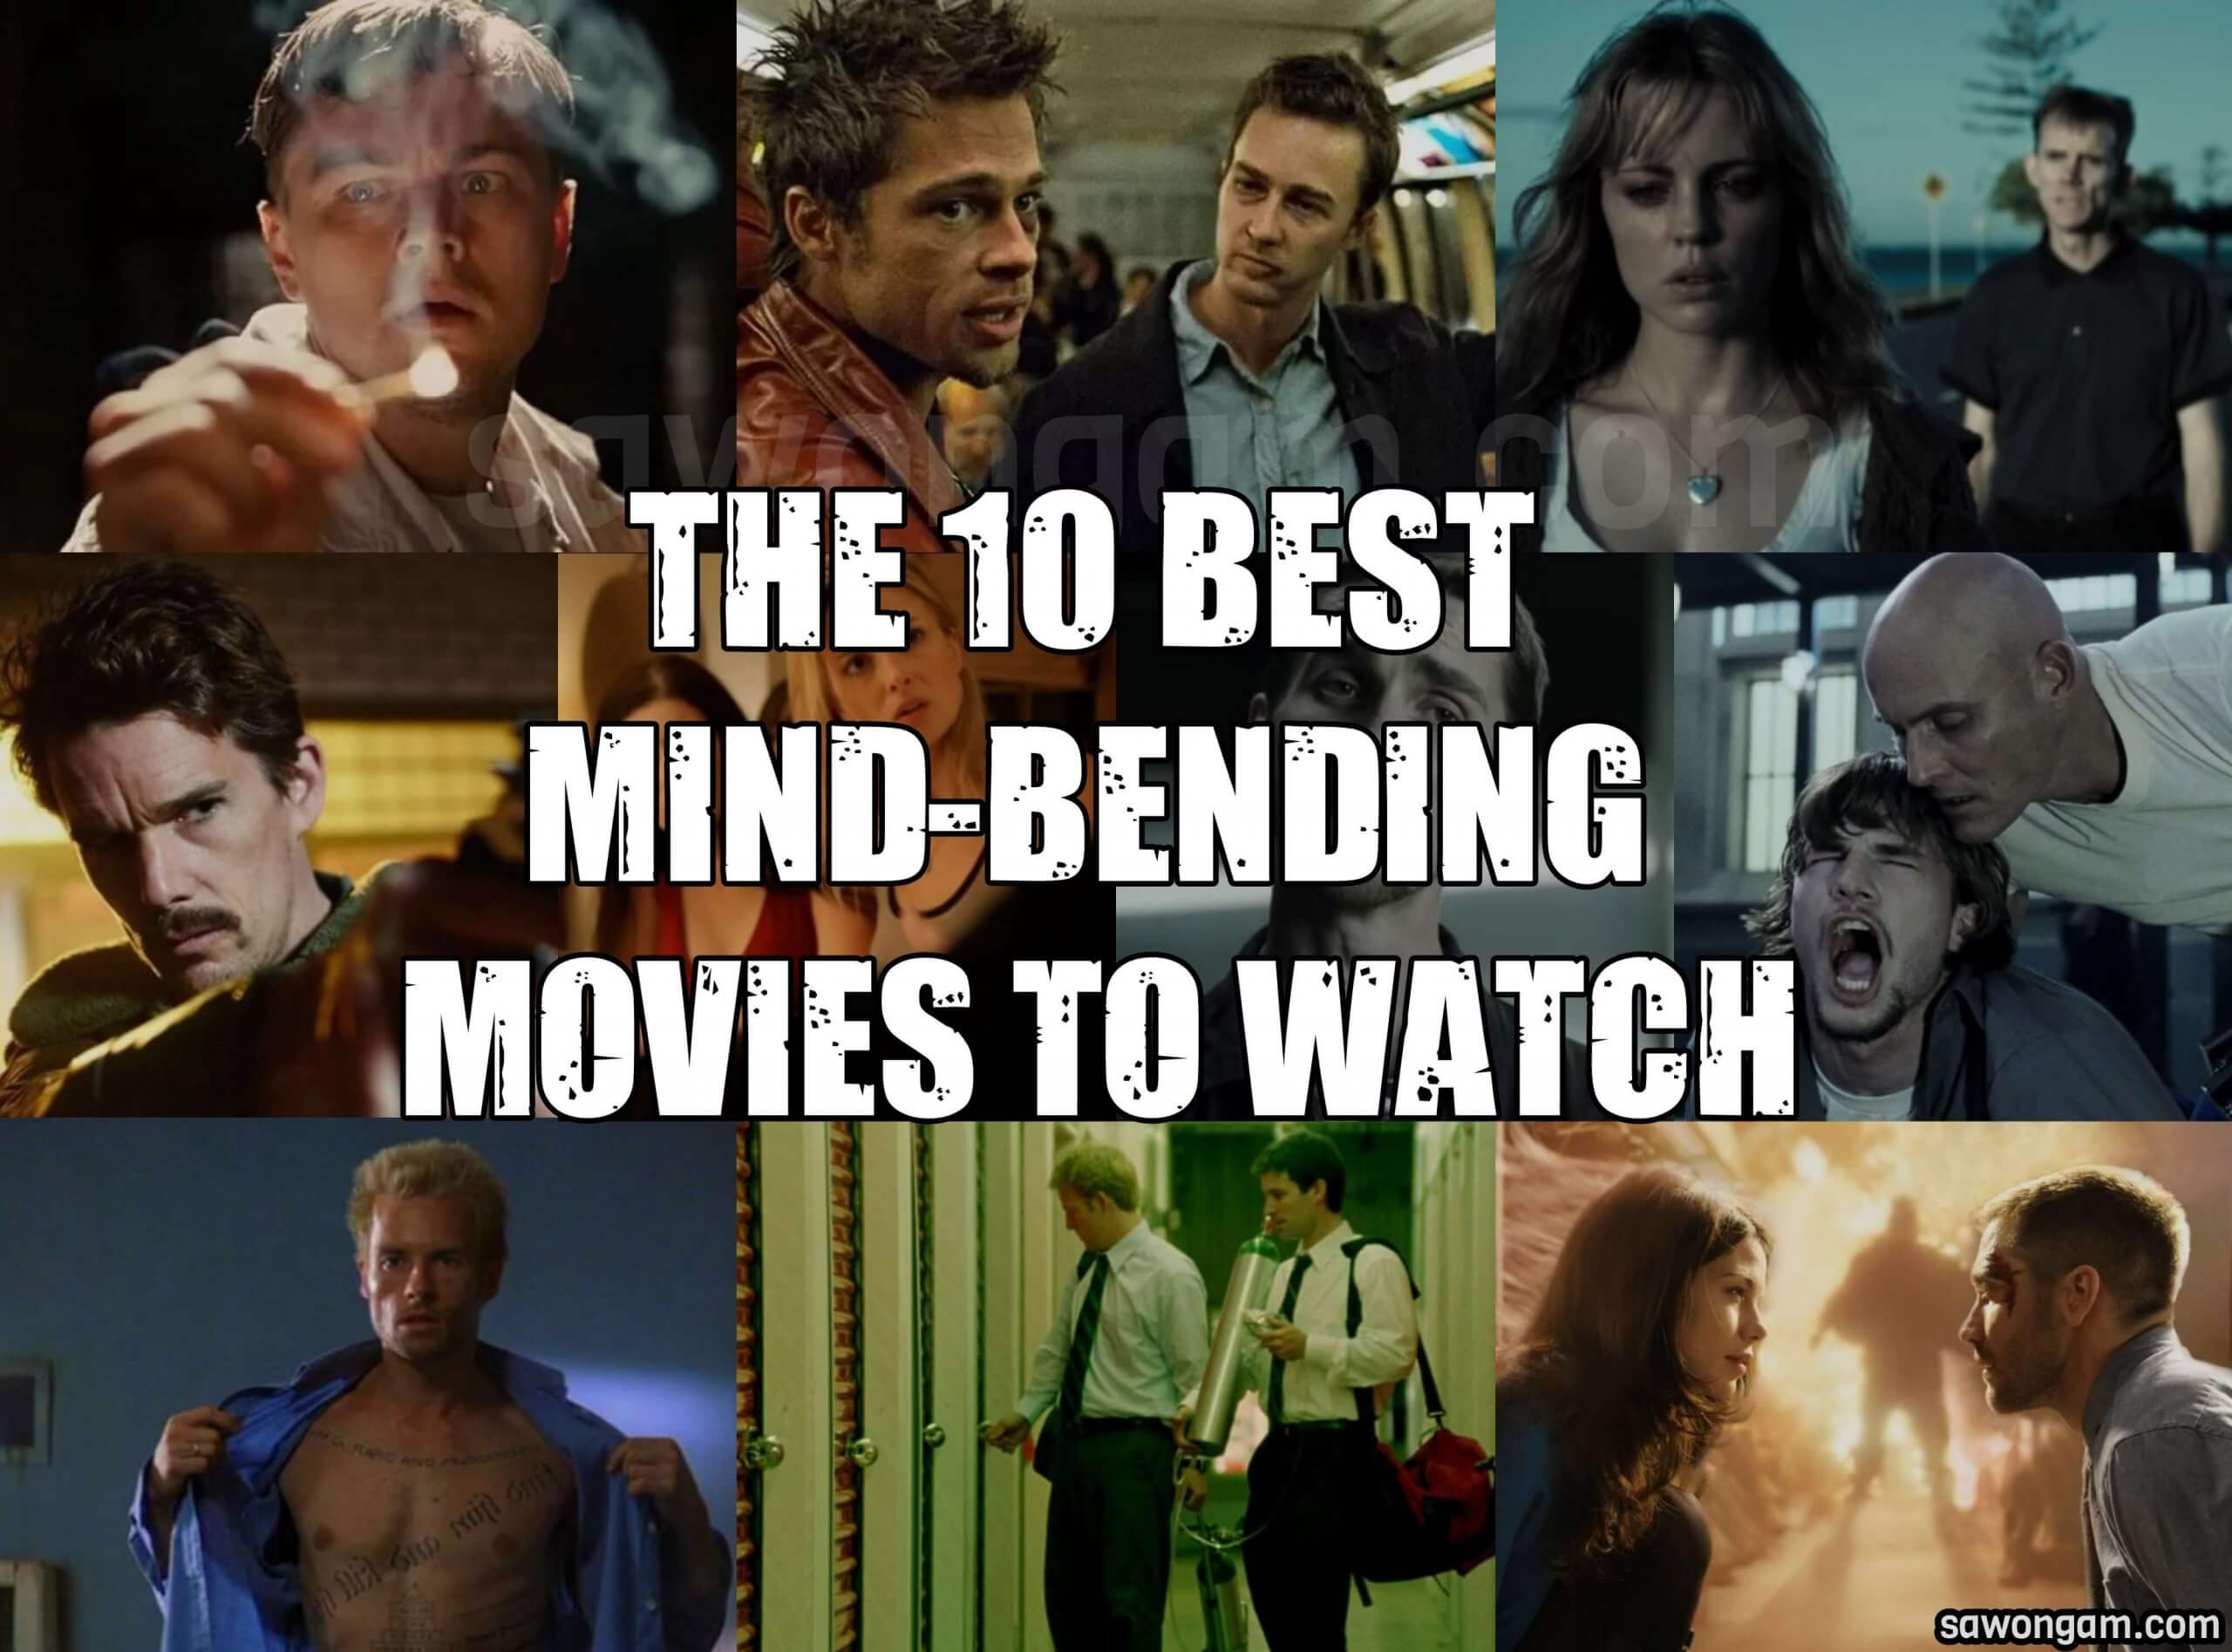 The 10 best mindbending movies you should watch